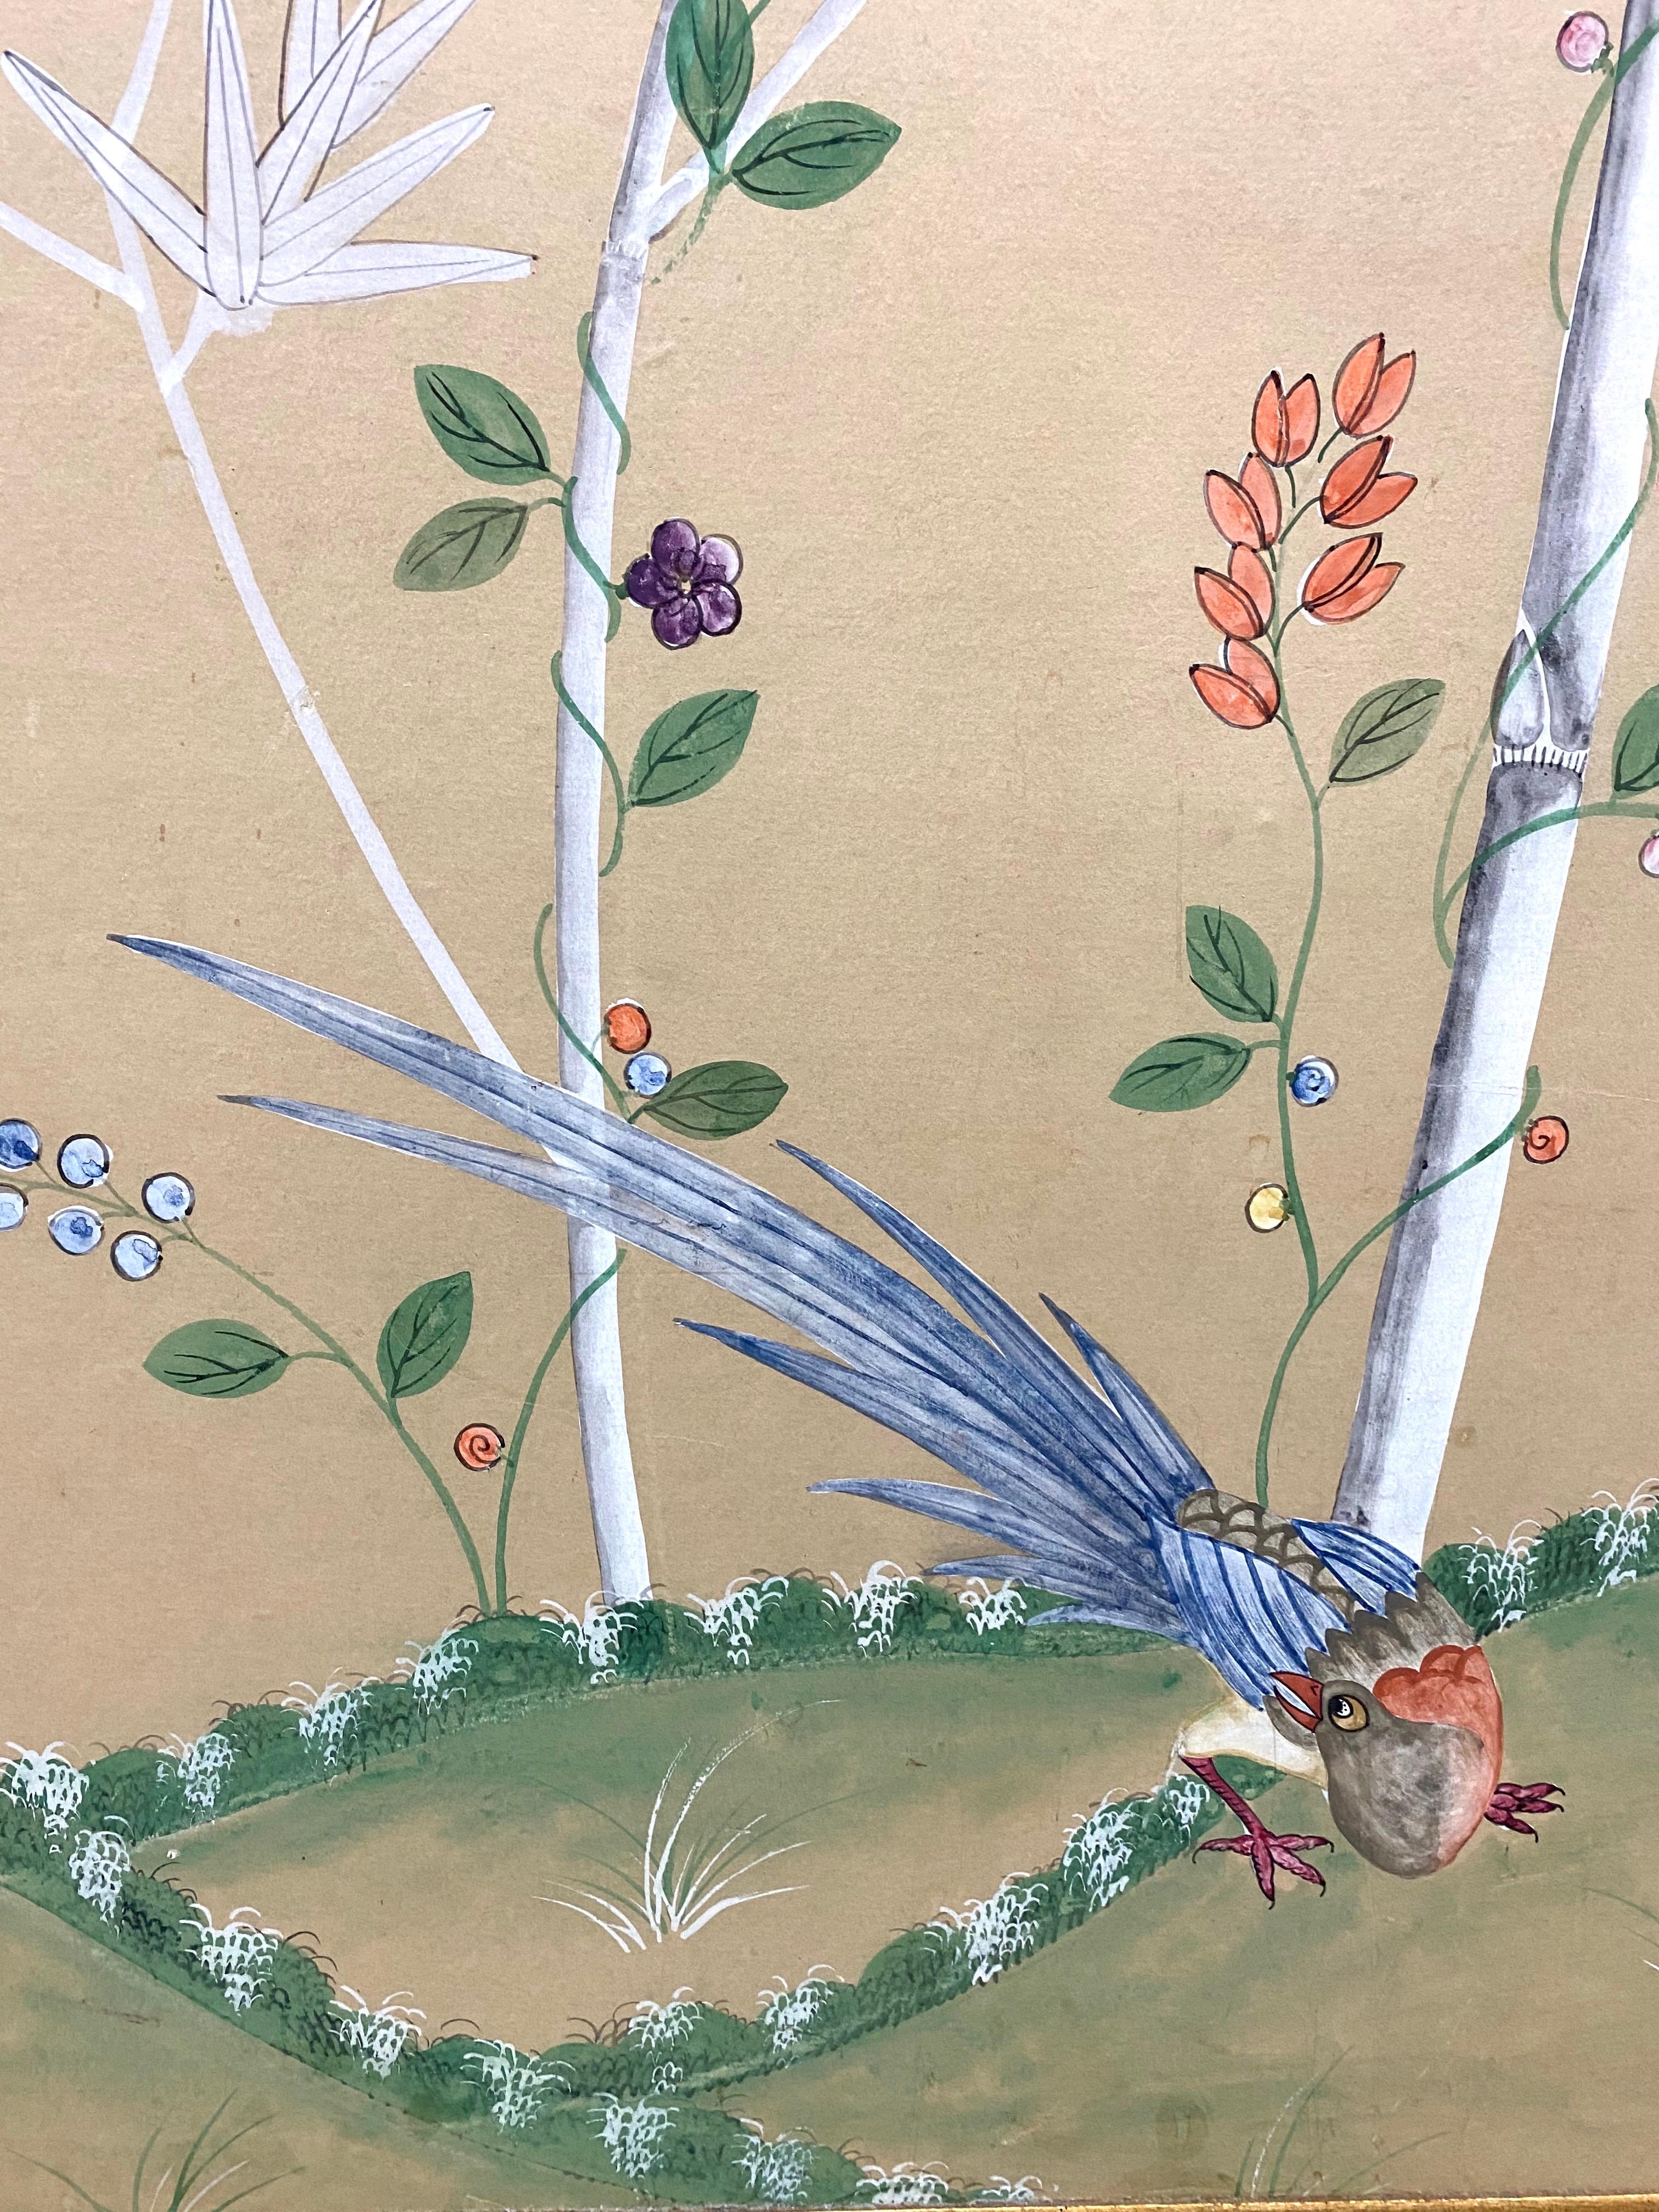 Gracie hand painted silk wallpaper panel with gold leaf frame. This is one of 2 vintage panels that can be used together to create a chic interior background. The chinoiserie pattern with cream back round, white bamboo branches and a hand painted